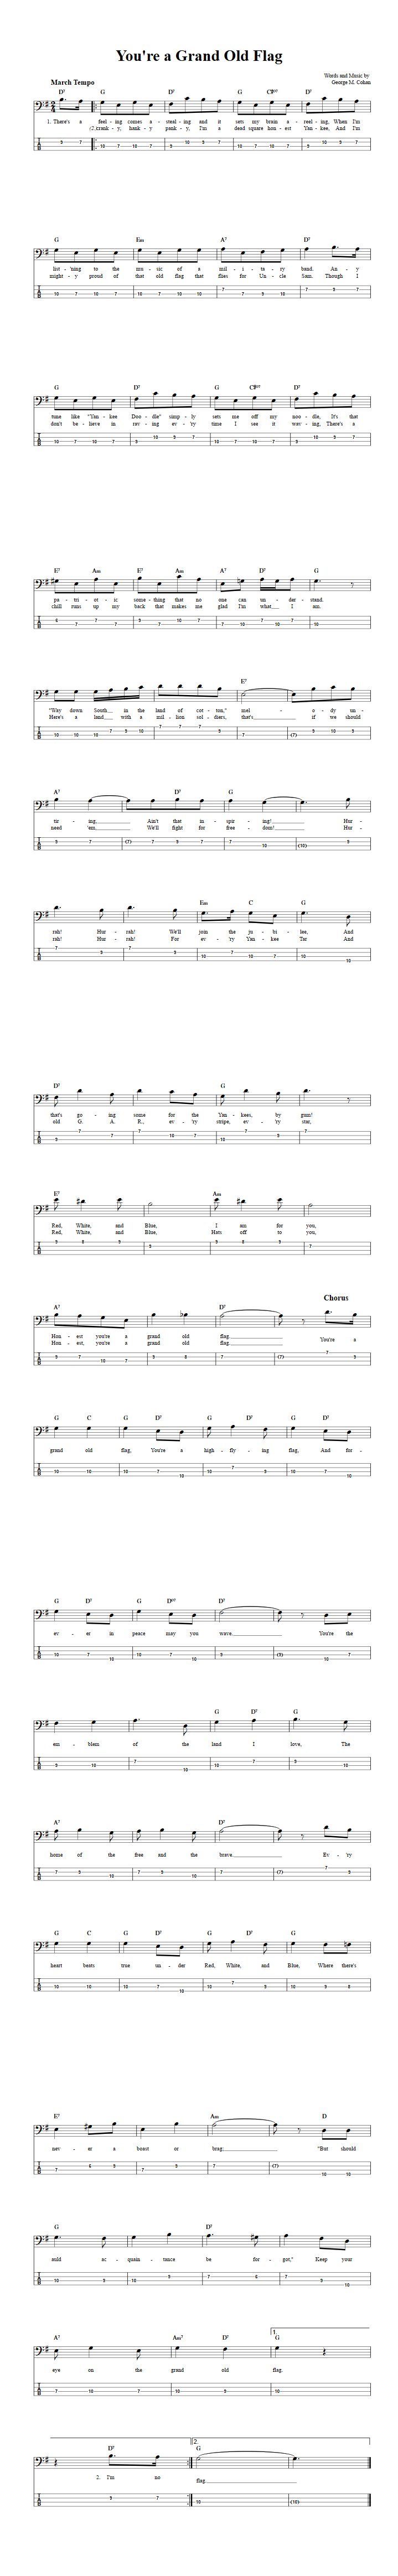 You're a Grand Old Flag  Bass Guitar Tab